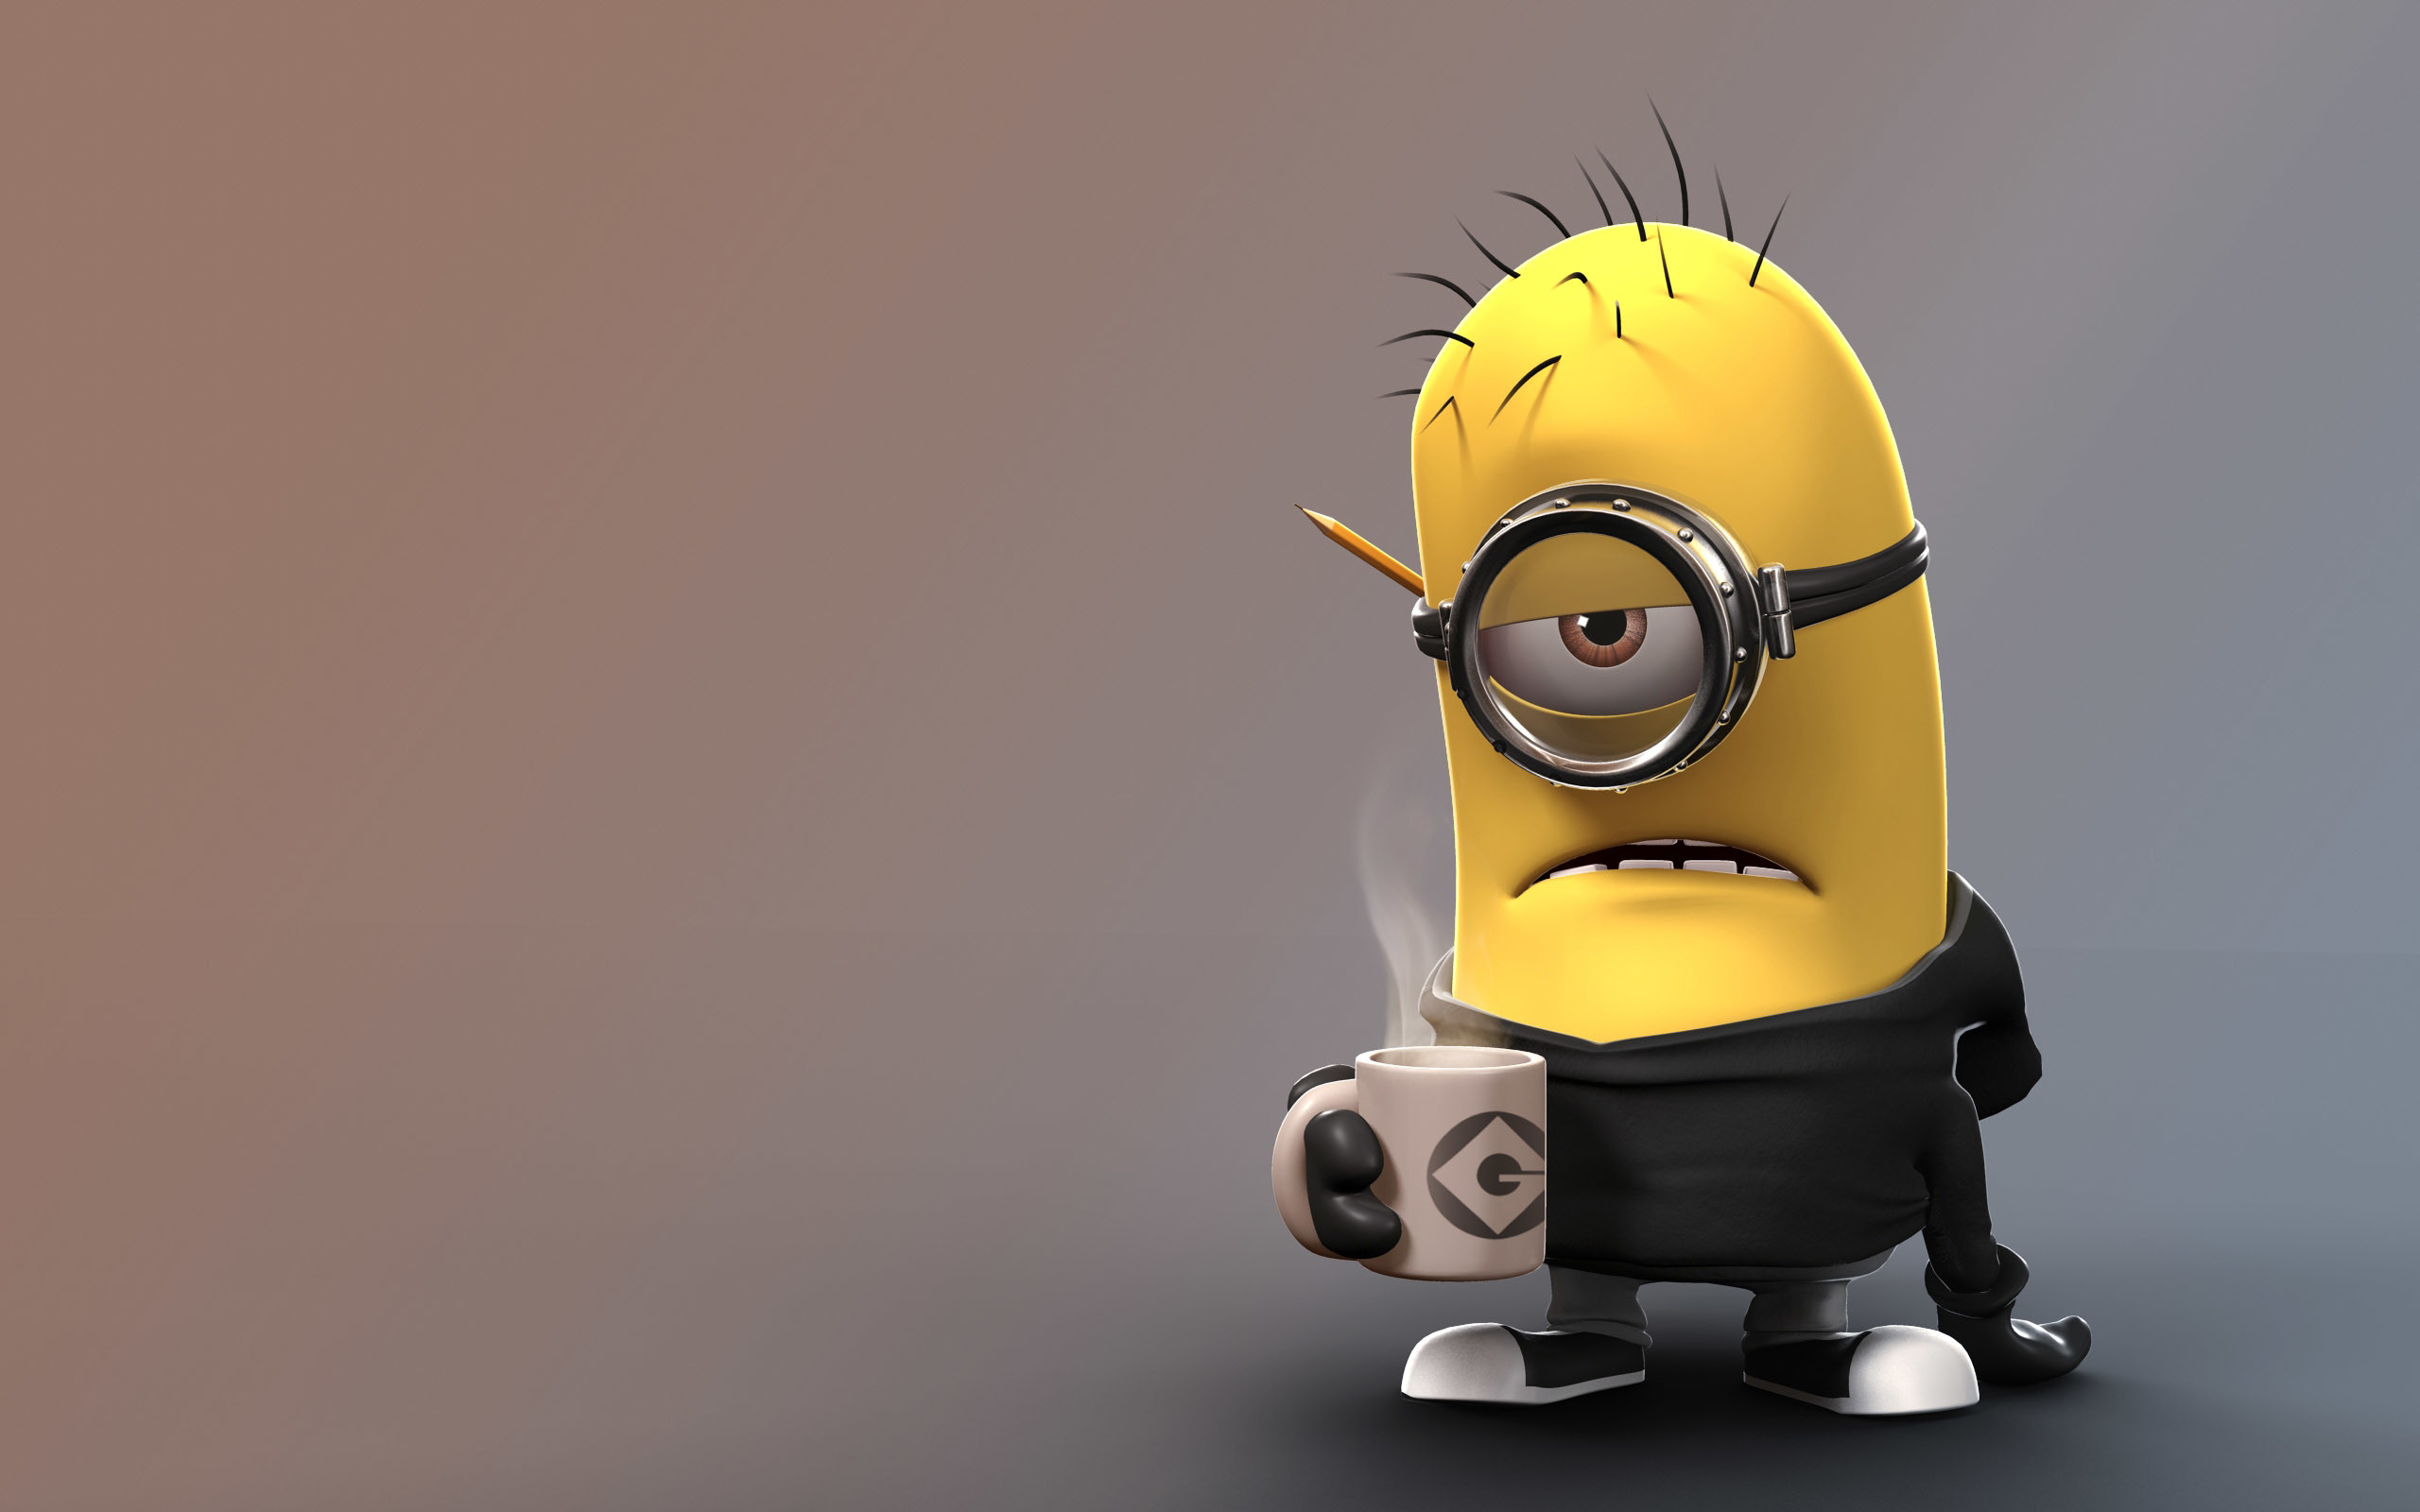 2560x1600 ... Minions pictures for Iphone 7, Iphone 7 plus, Iphone 6 plus